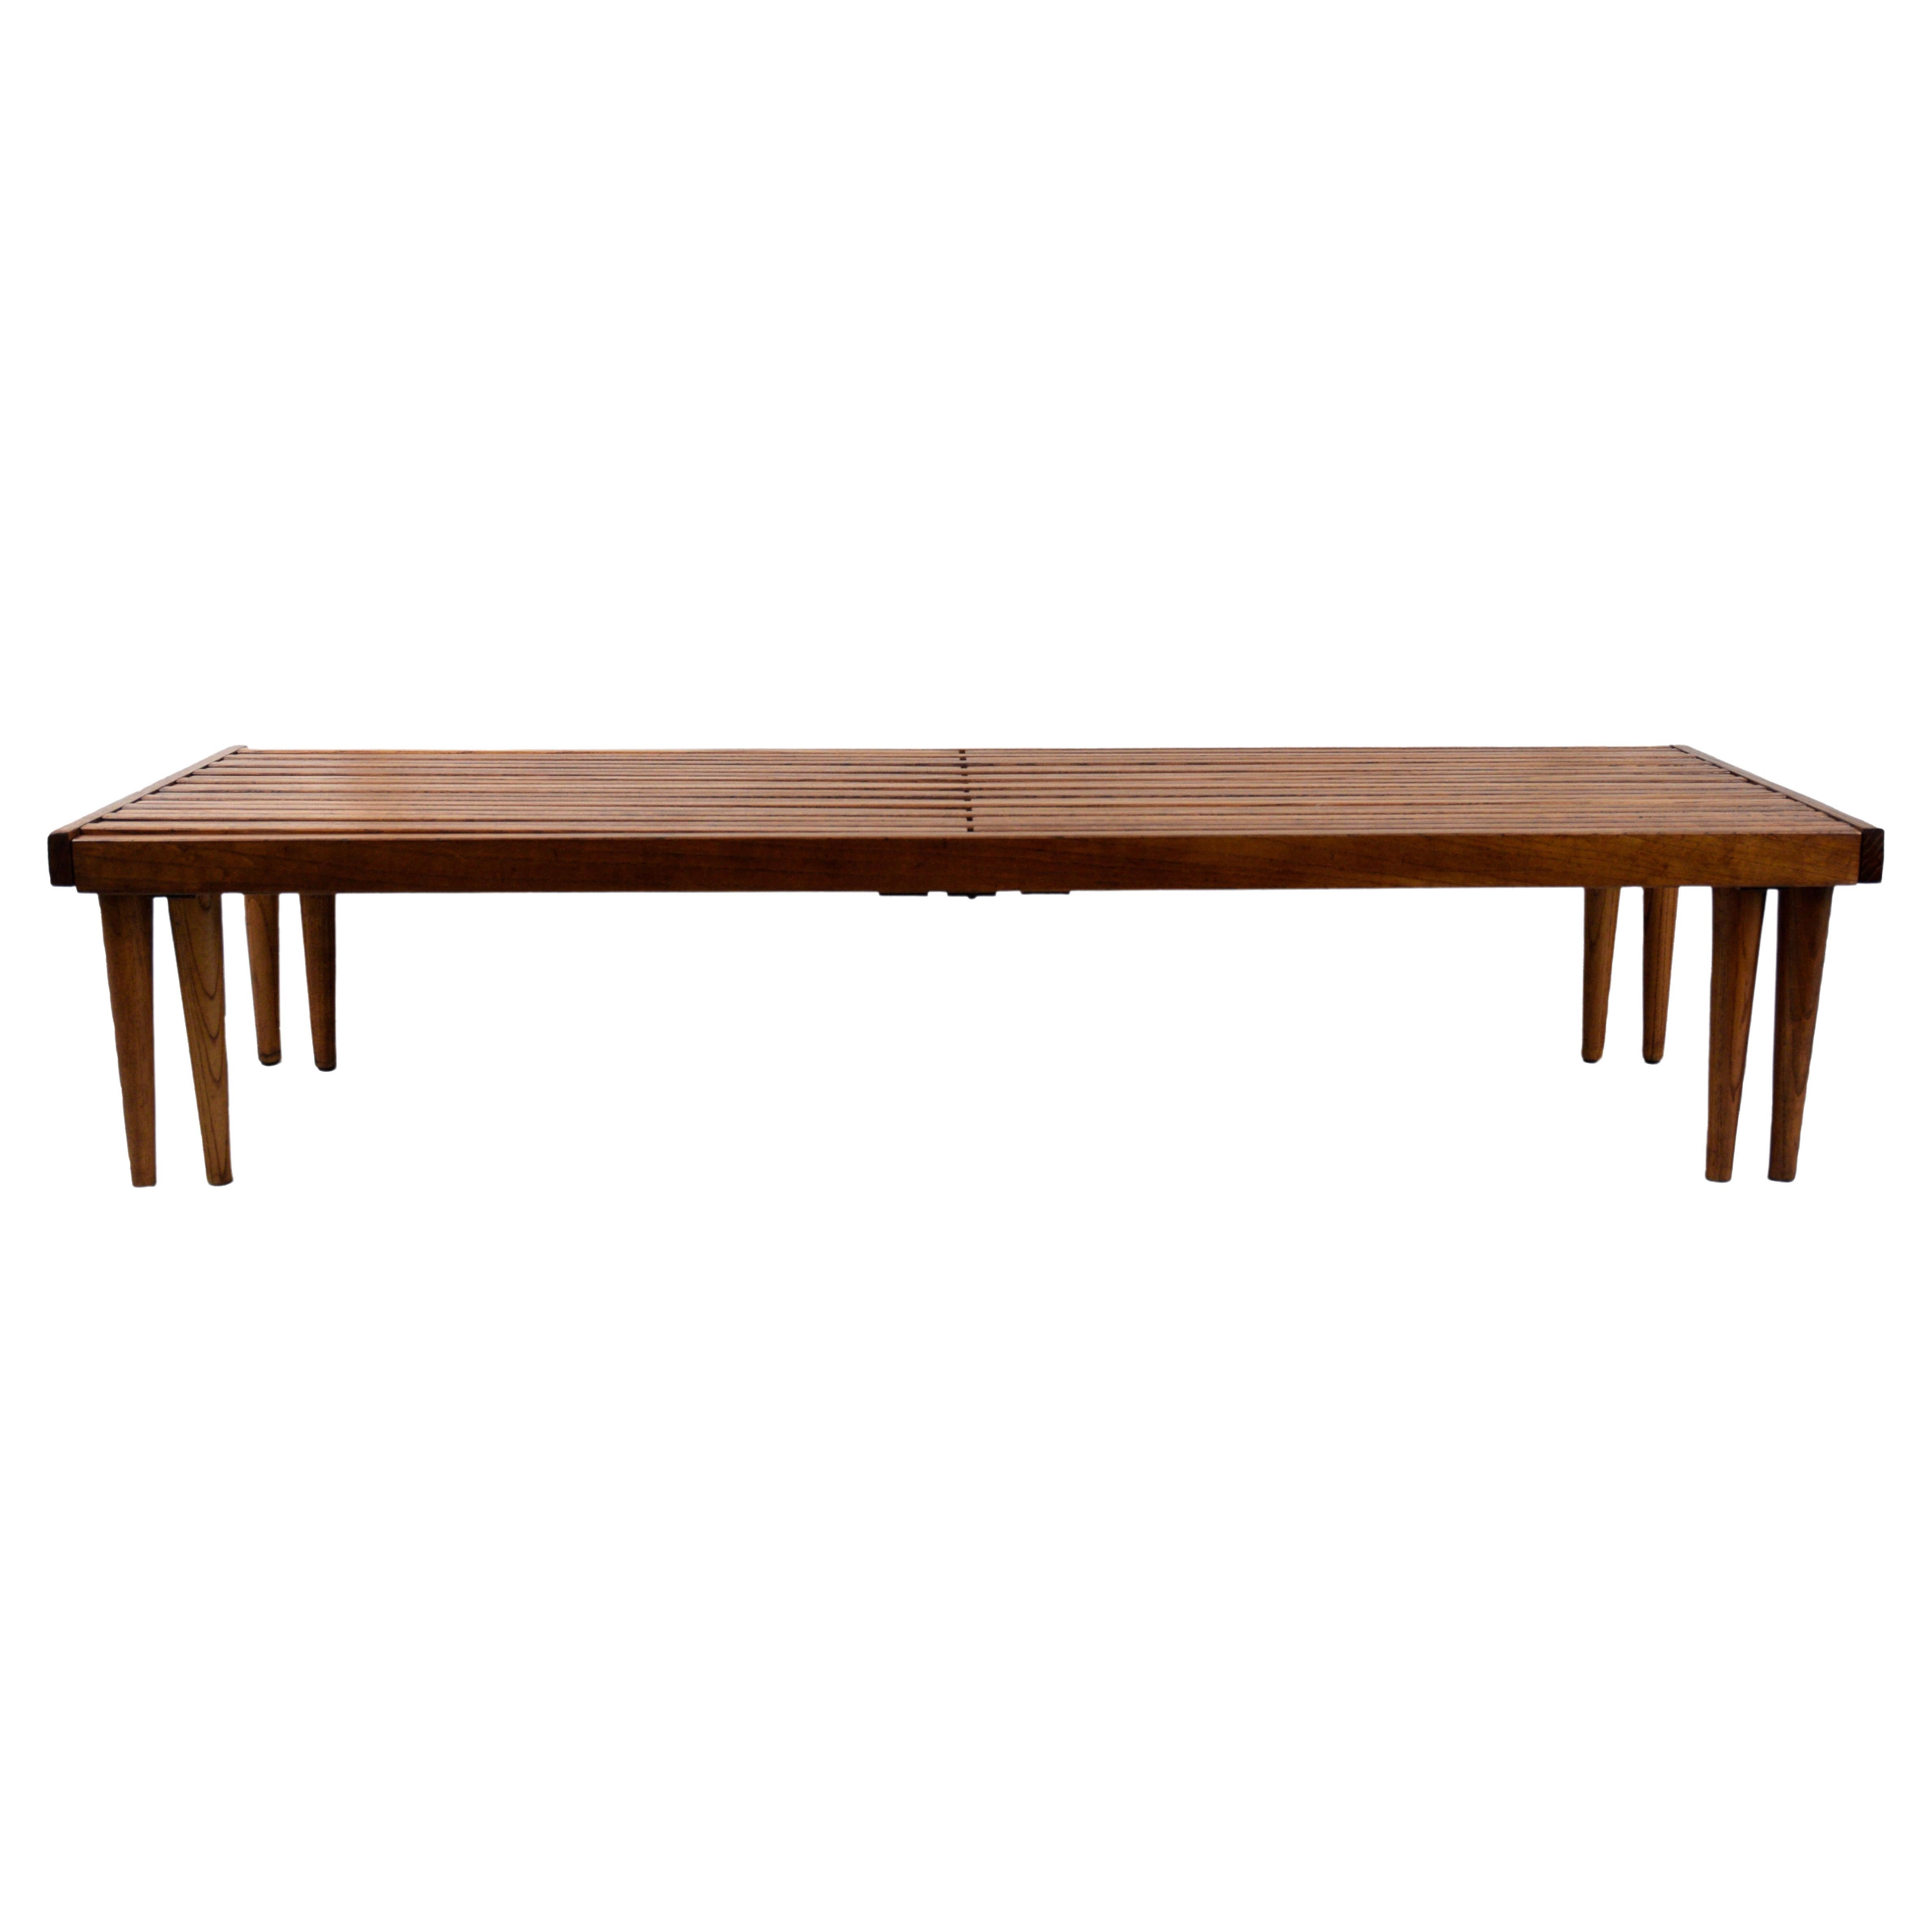 Mid Century Modern Expandable Slatted Coffee Table/Bench by John Keal